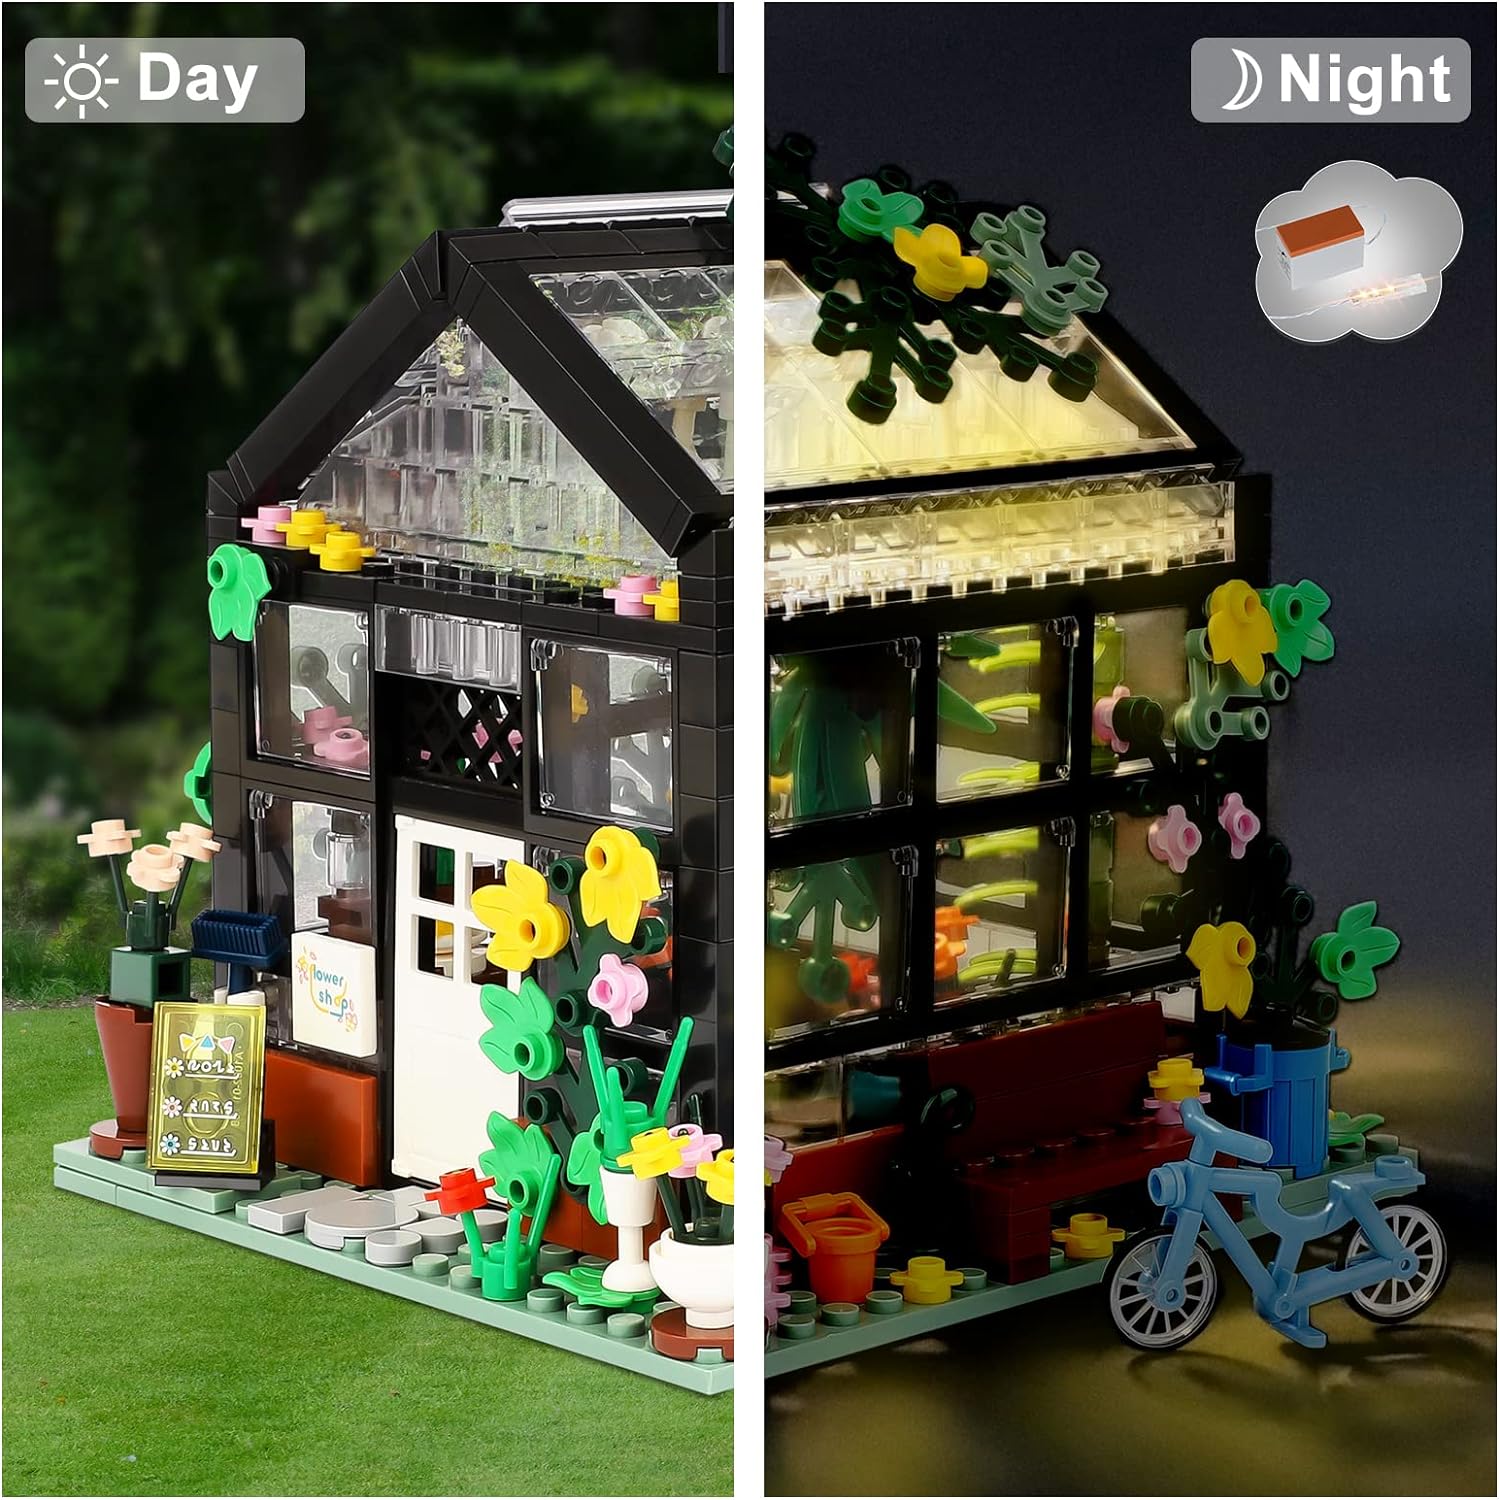 Flower House Building Set, Compatible with Lego Flower Create Elegance and Warmth Environment (579 Pcs) Cykapu